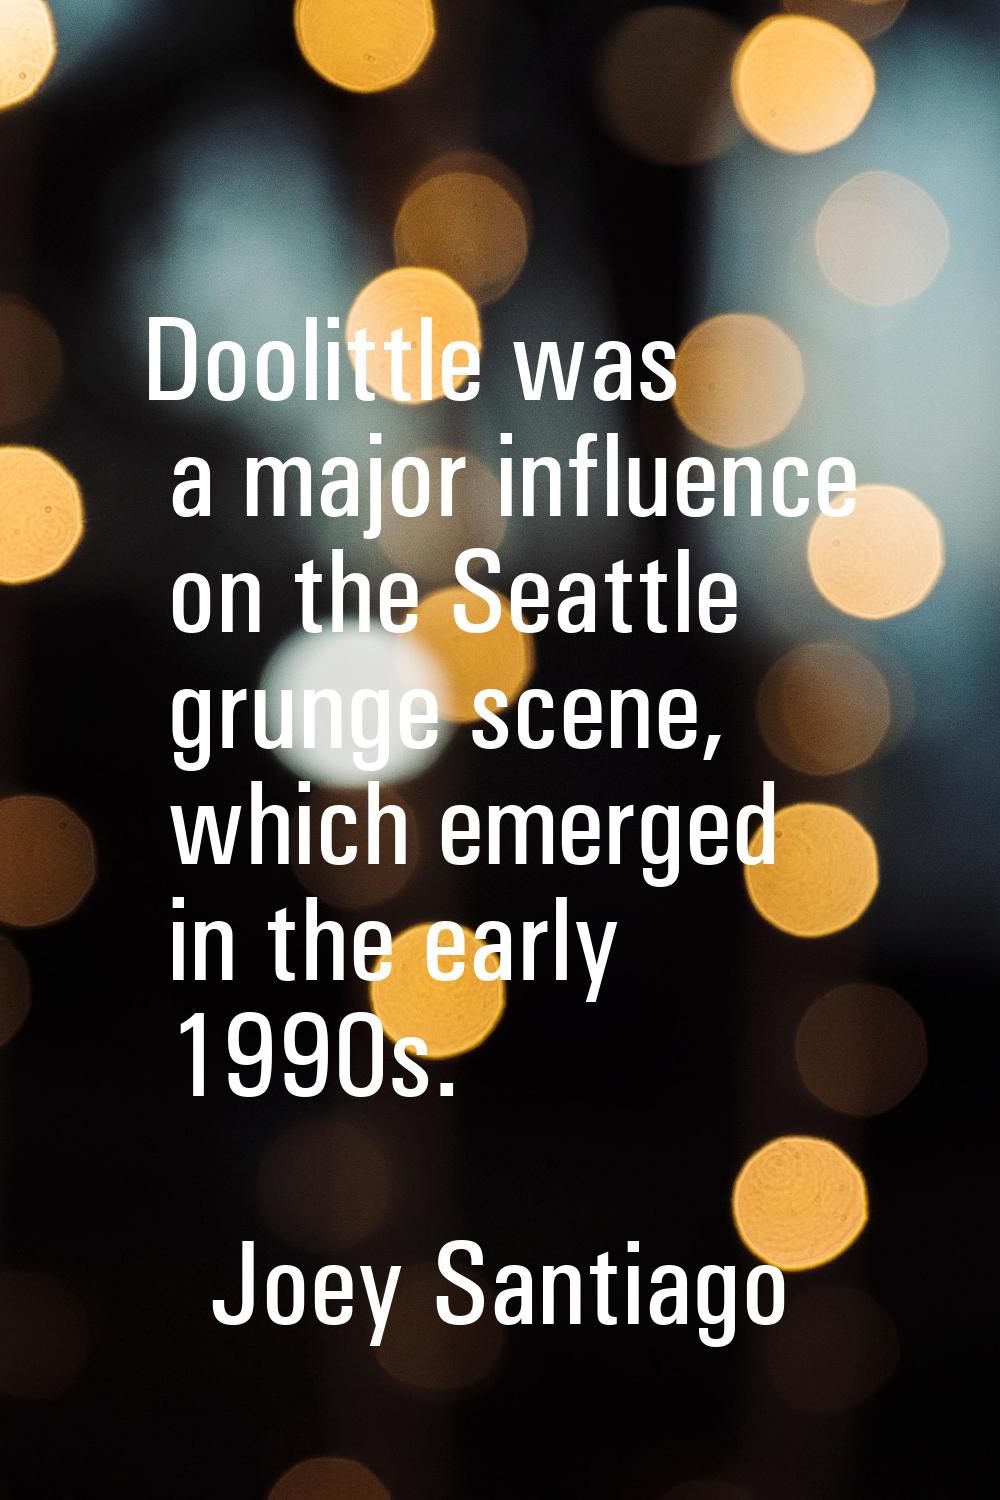 Doolittle was a major influence on the Seattle grunge scene, which emerged in the early 1990s.